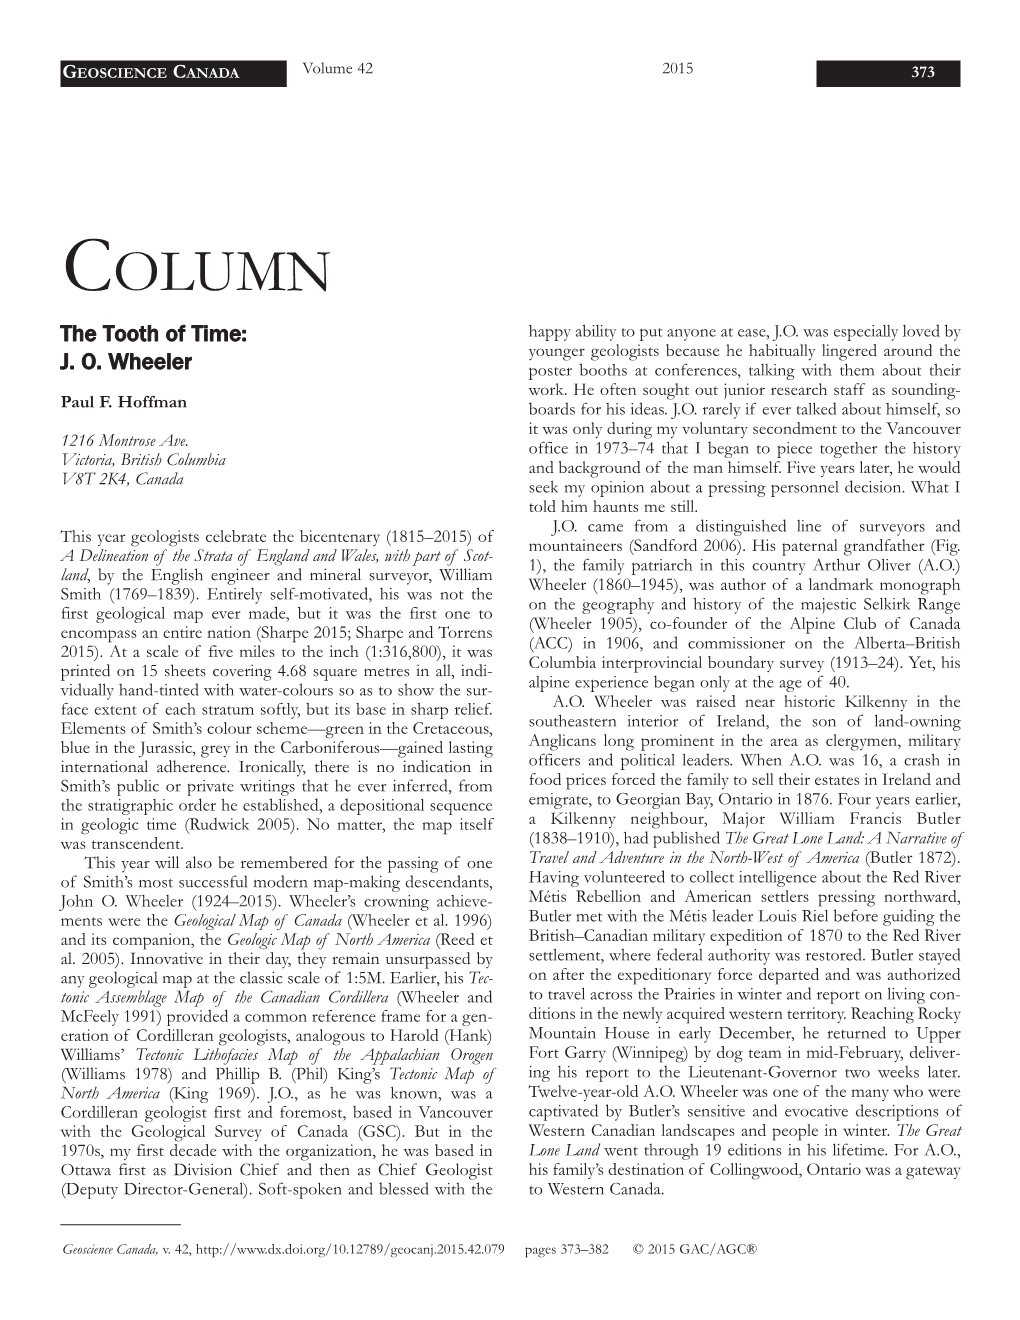 COLUMN the Tooth of Time: Happy Ability to Put Anyone at Ease, J.O